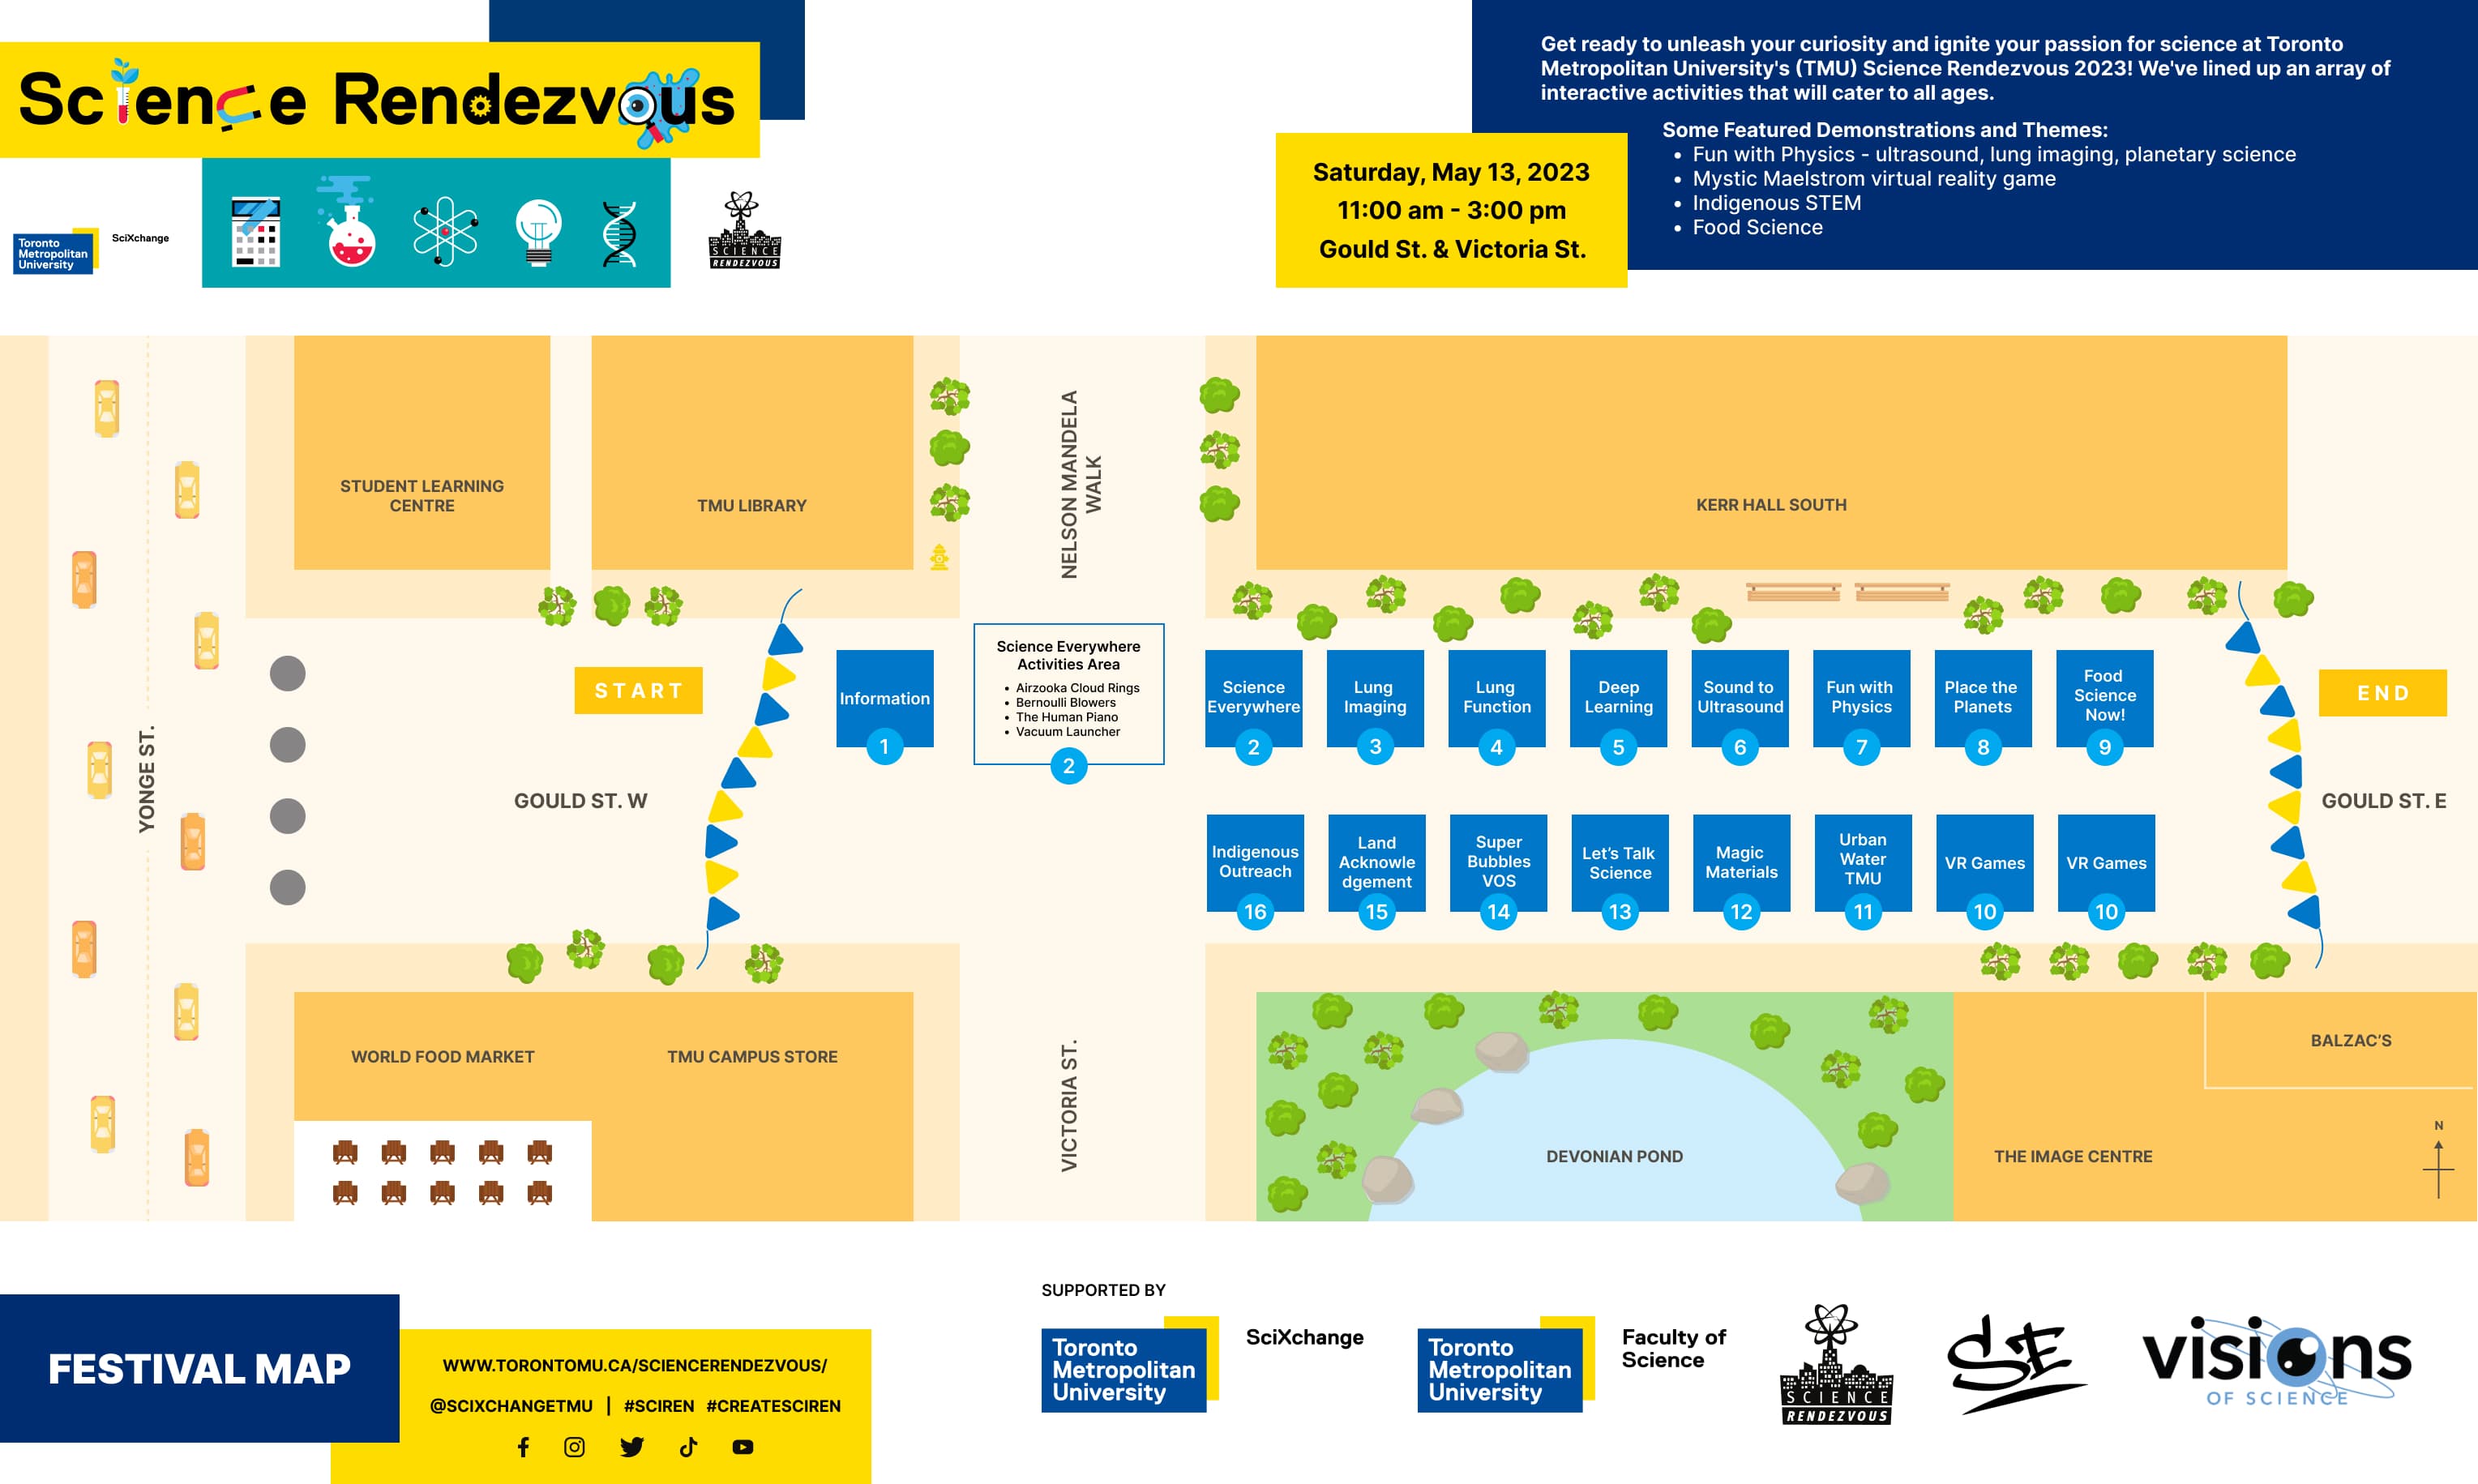 A digitally illustrated sitemap of Science Rendezvous 2023 which showcases the location of all the booths located on Gould Street at TMU.